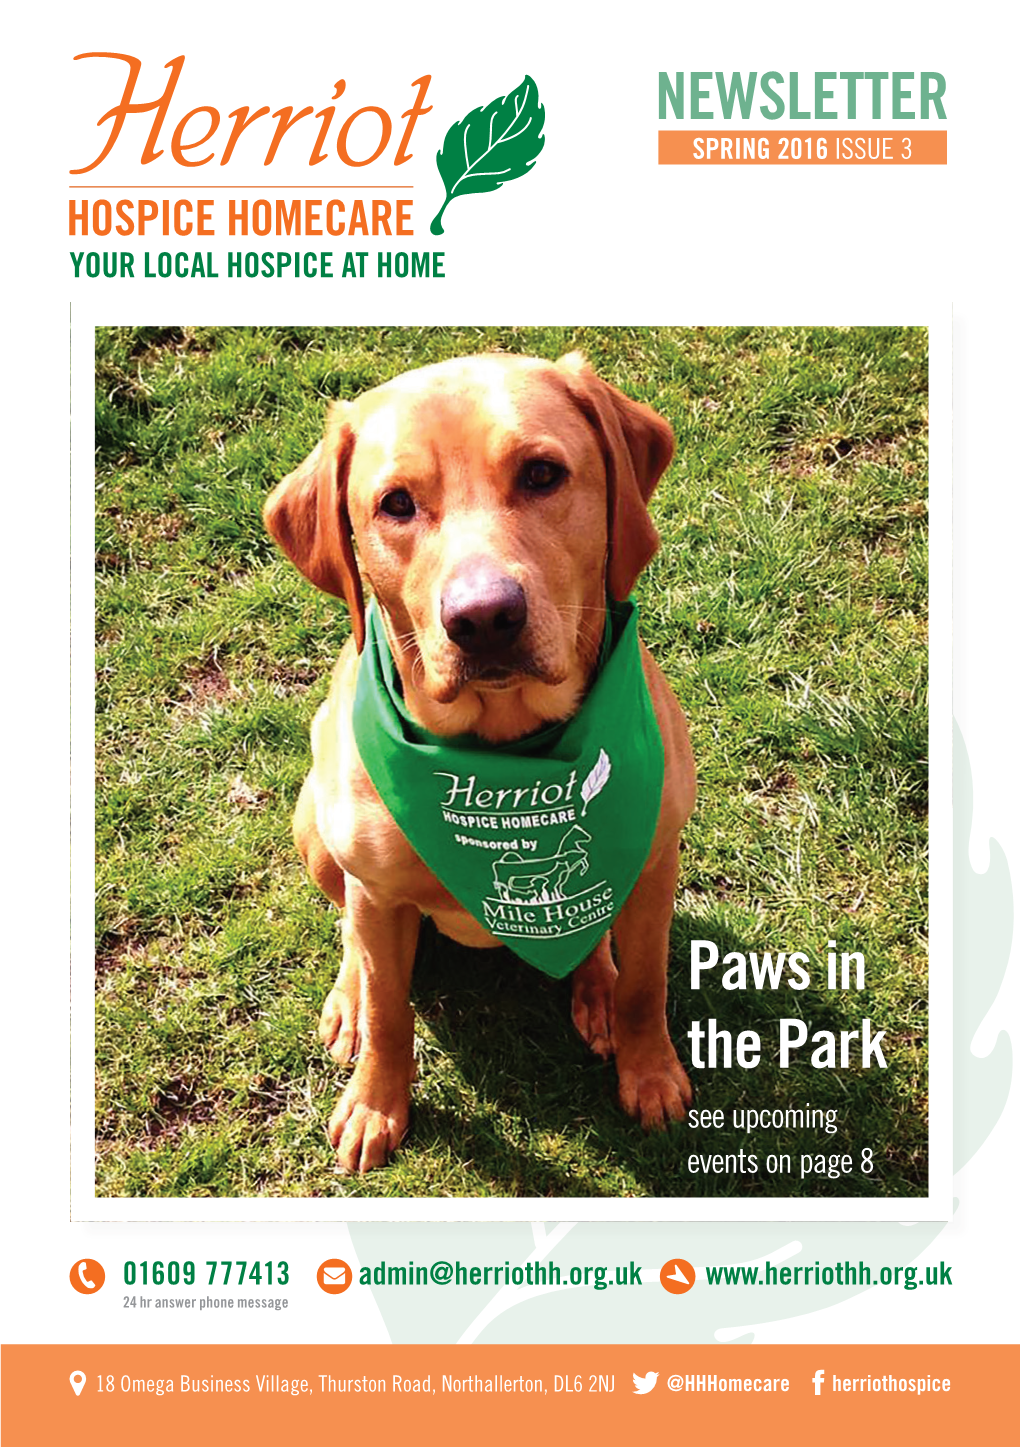 Paws in the Park See Upcoming Events on Page 8